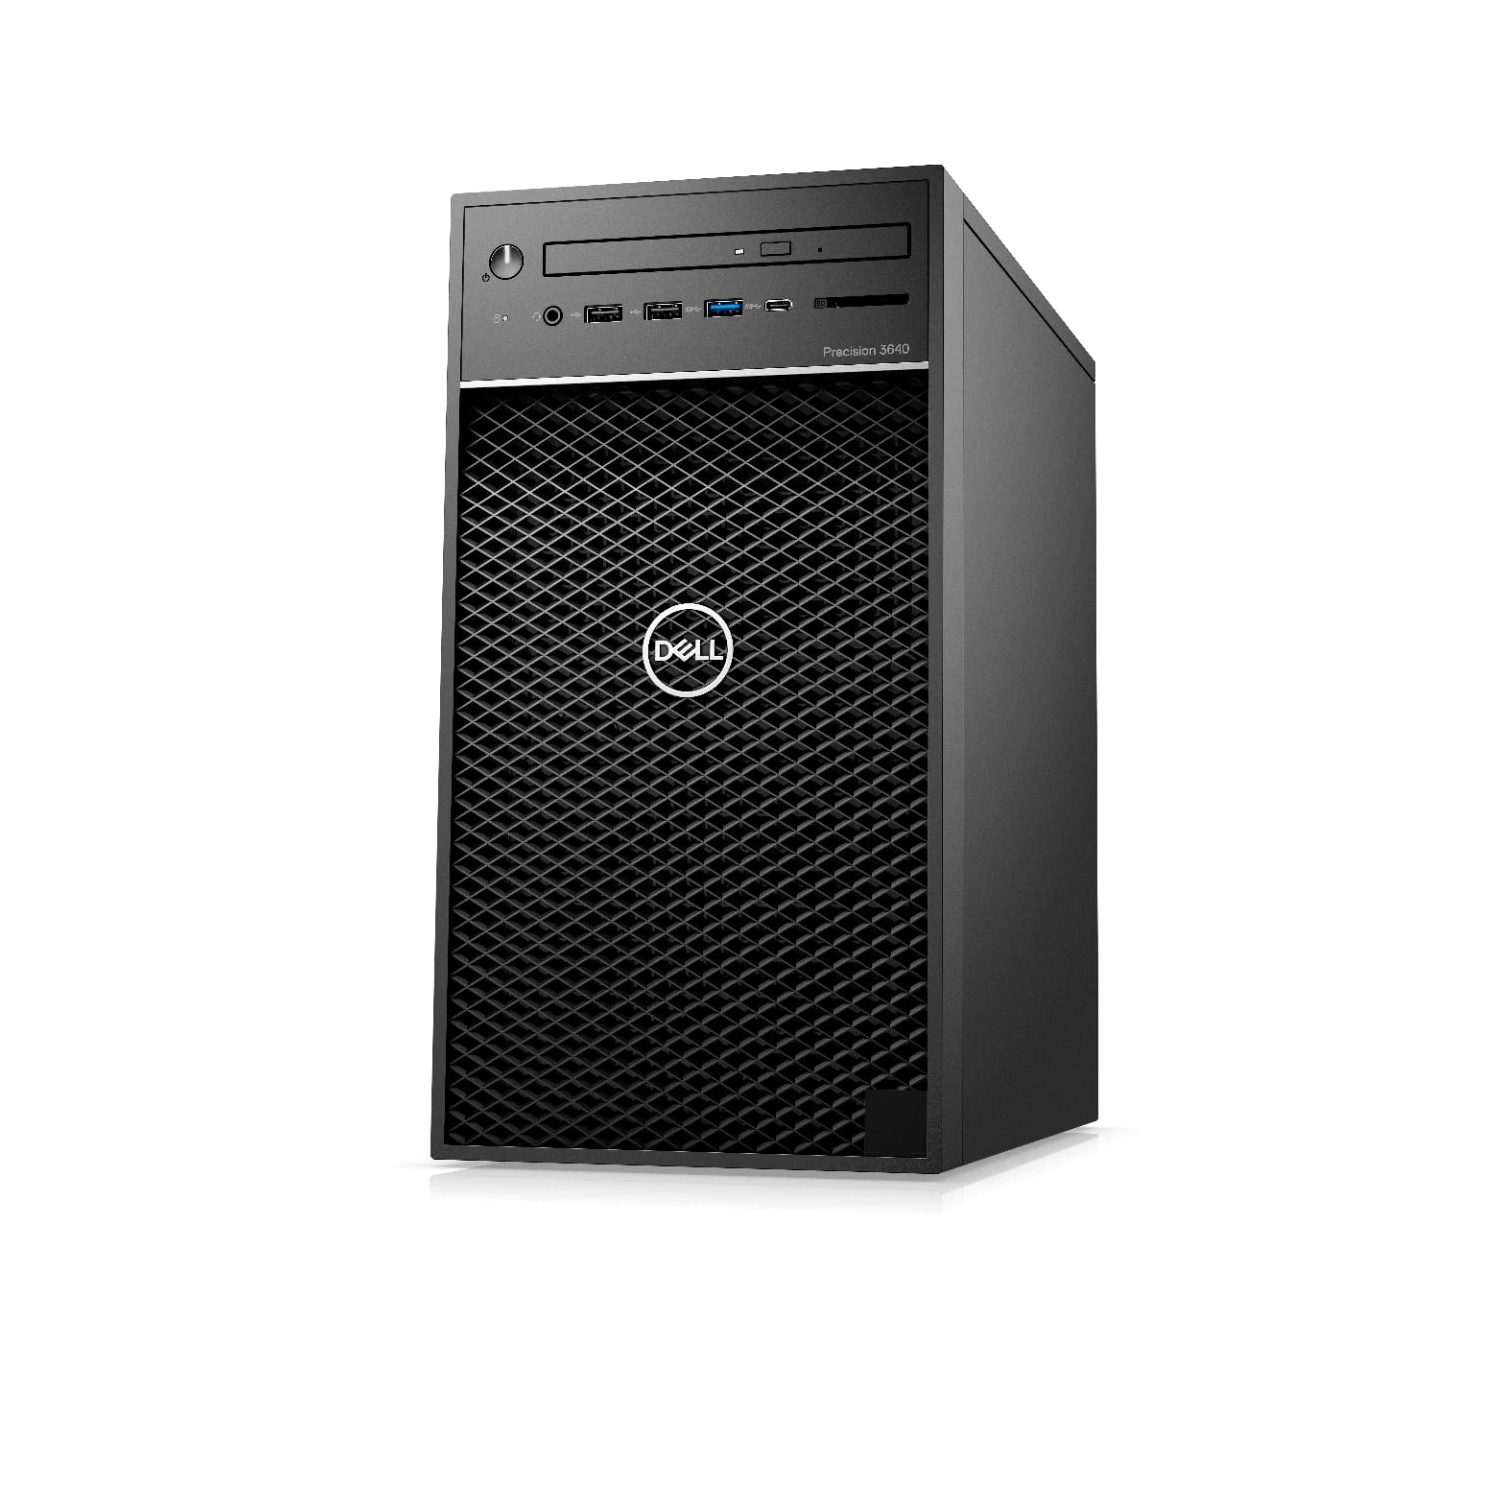 Refurbished (Excellent) - Dell Precision T3640 Workstation Desktop (2018), Core i7, 256GB SSD, 16GB RAM, RTX 3090, 8 Cores @ 5.1 GHz, 10th Gen CPU Certified Refurbished